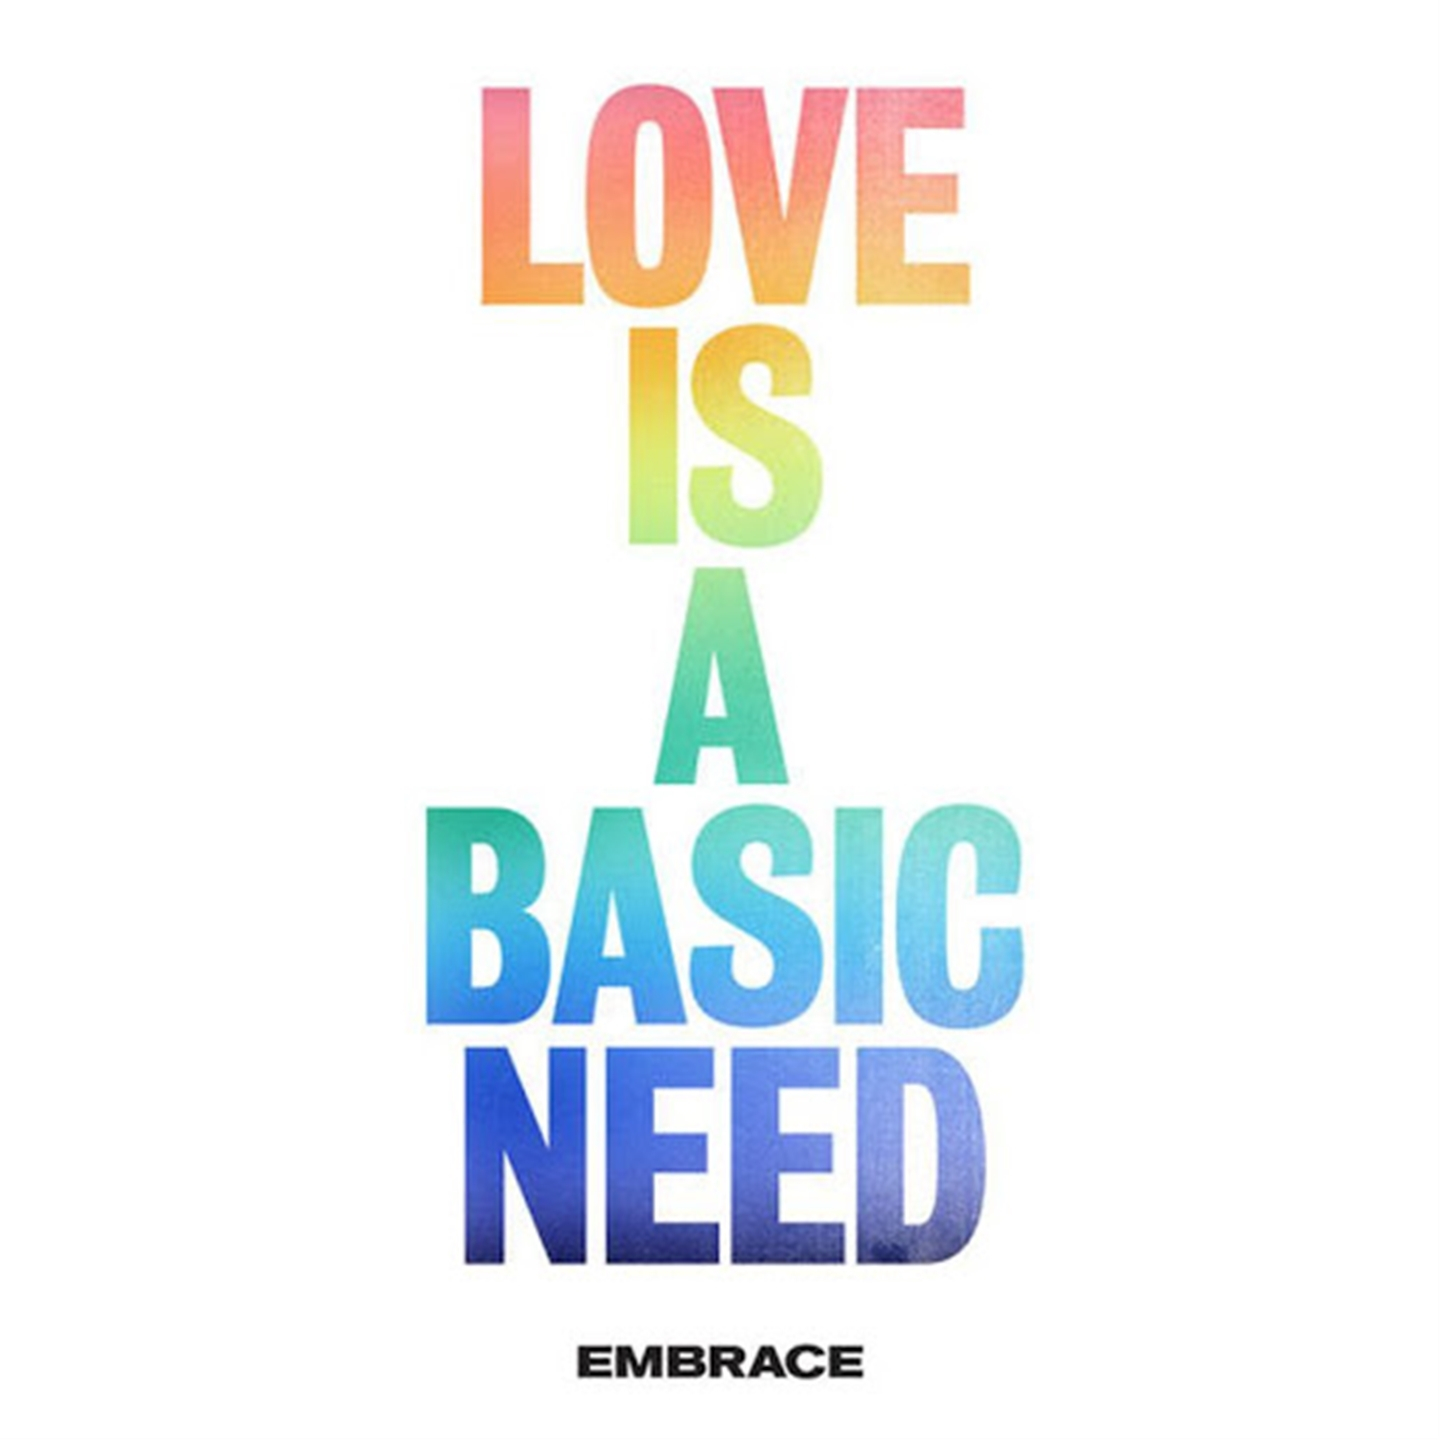 LOVE IS A BASIC NEED